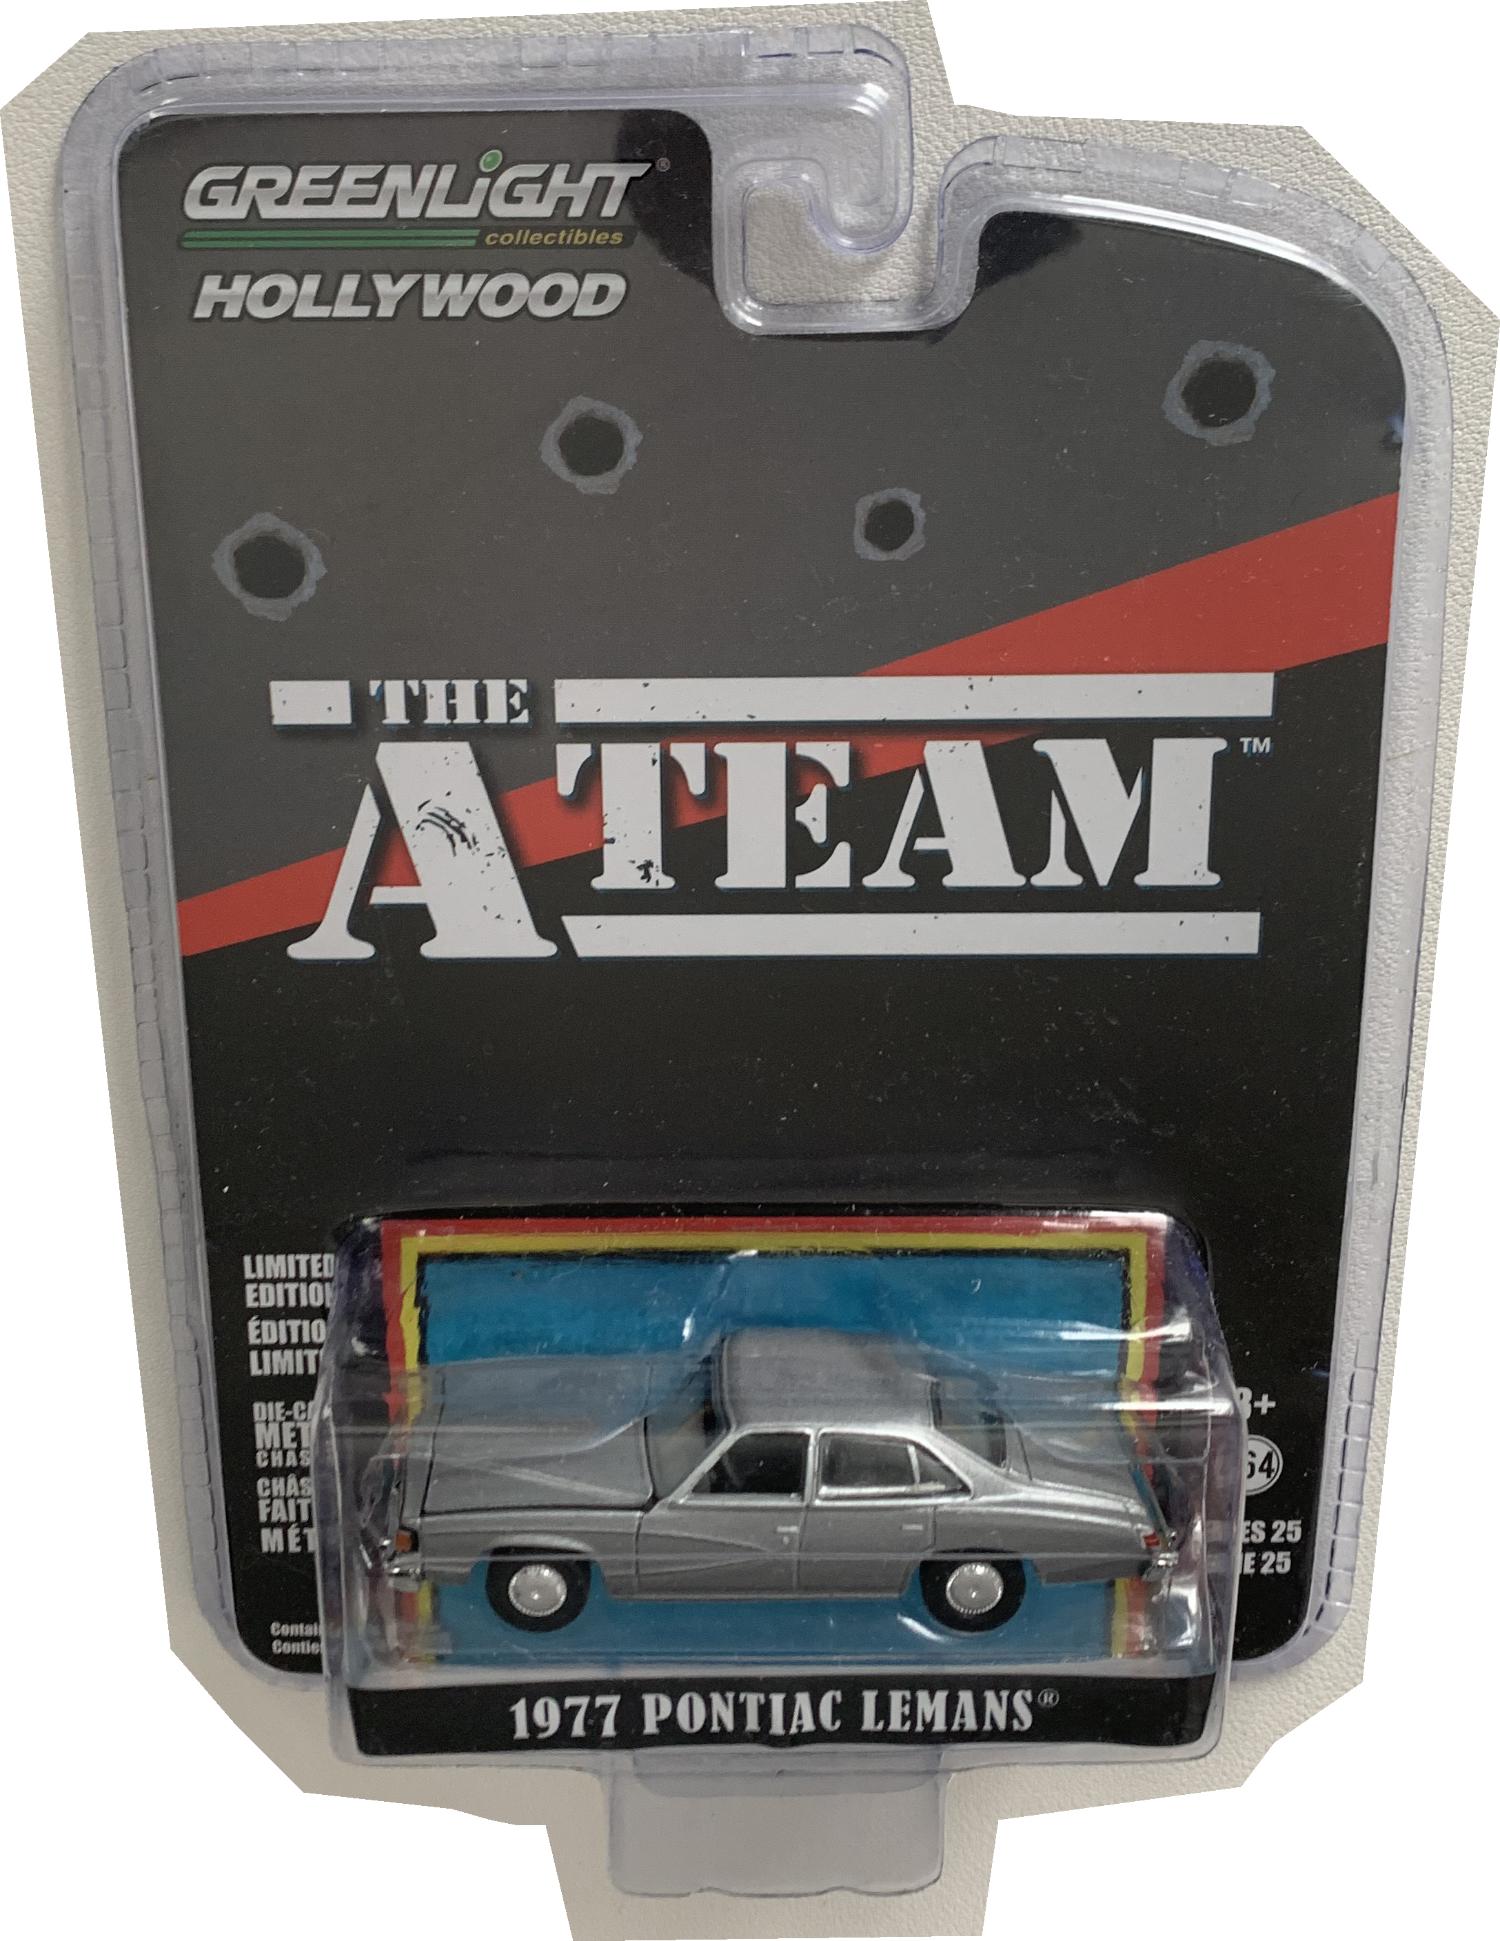 The A Team 1977 Pontiac Lemans in metallic grey 1:64 scale model from Greenlight, limited edition model